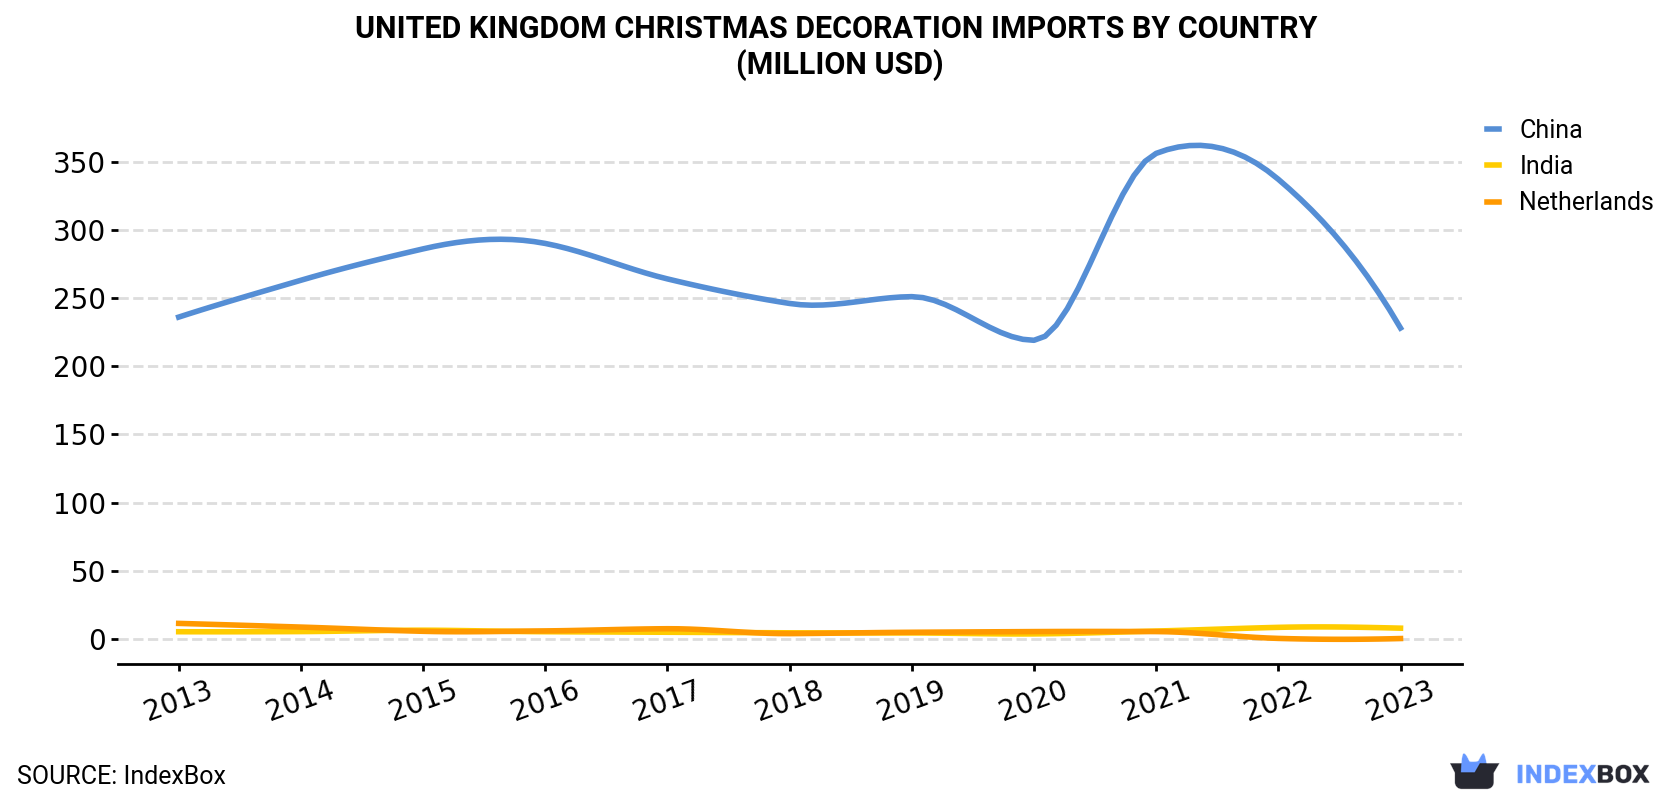 United Kingdom Christmas Decoration Imports By Country (Million USD)